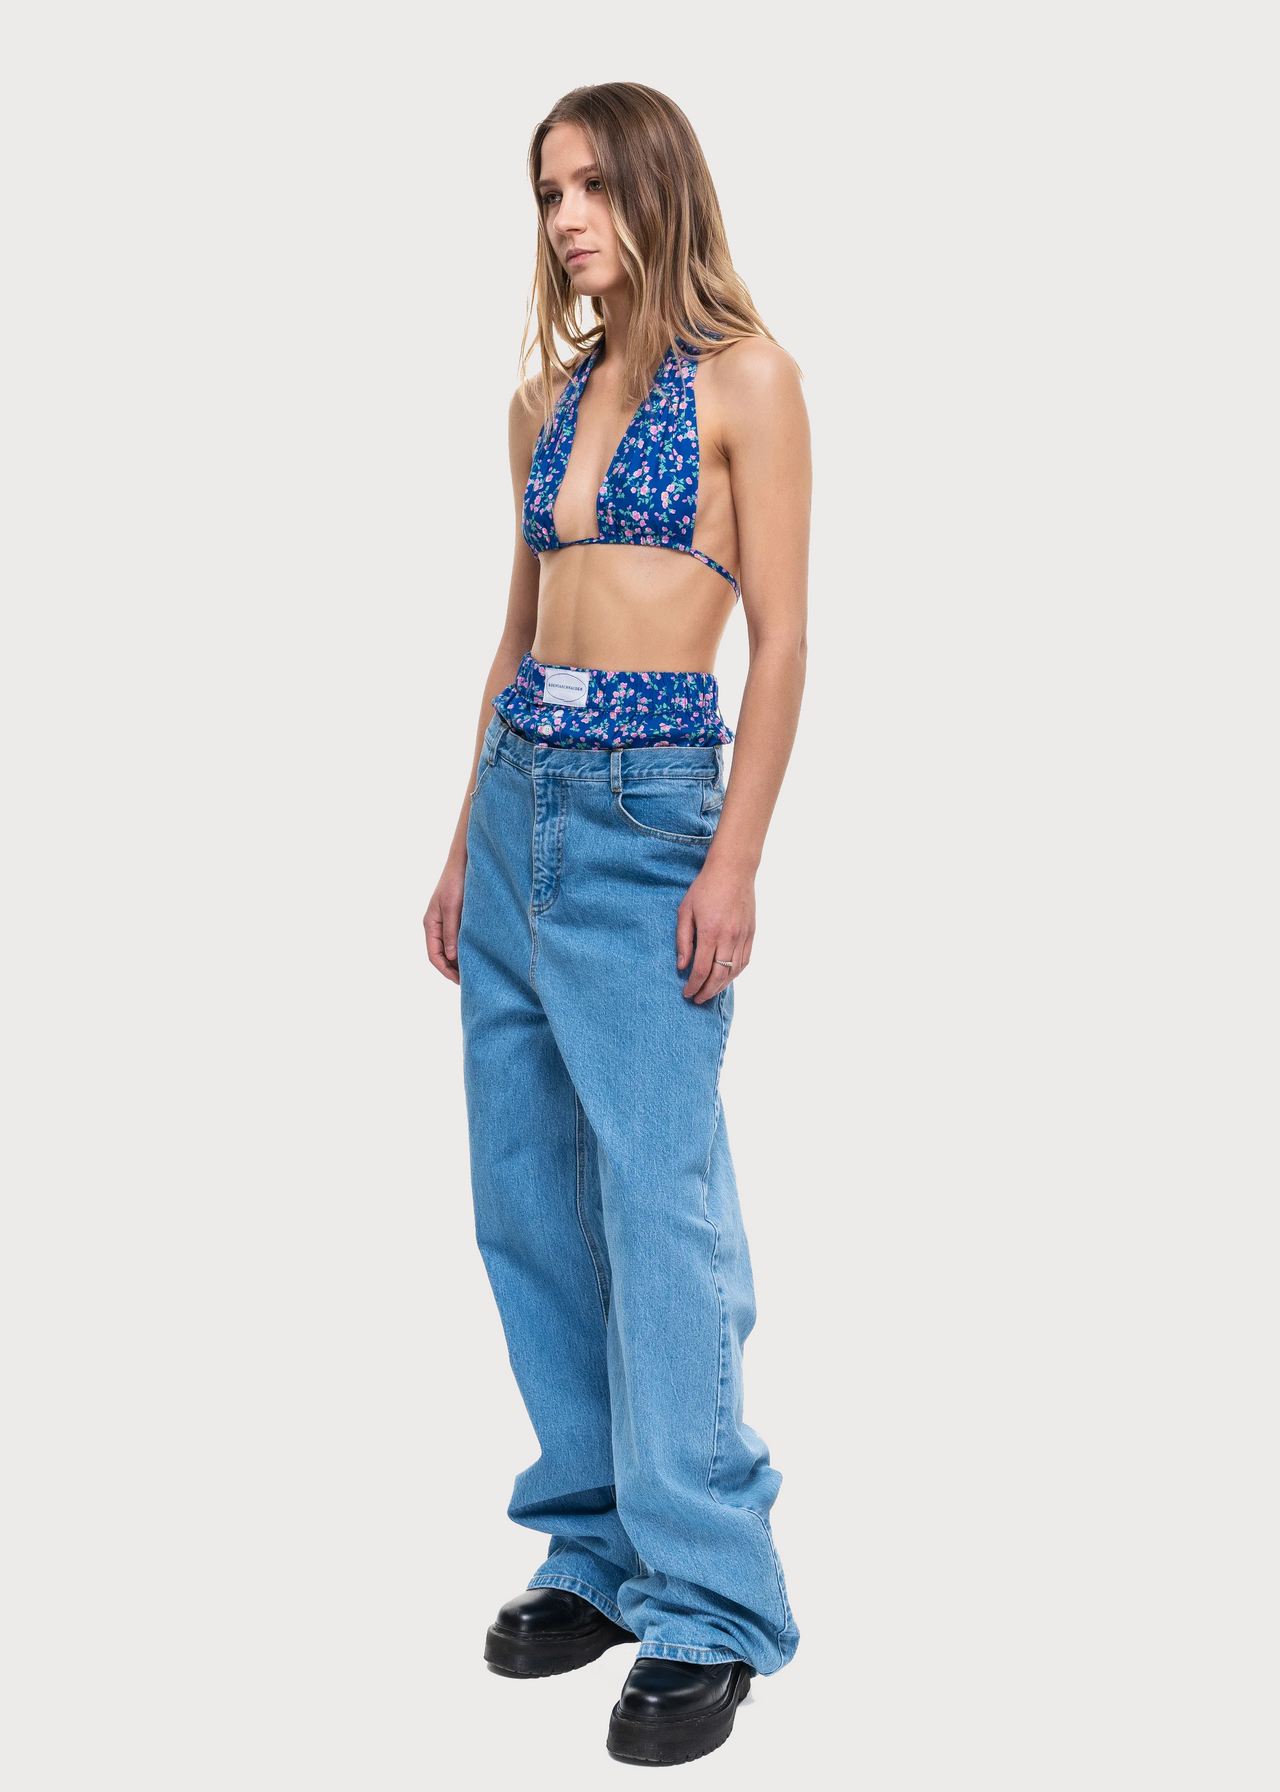 2 in 1 Boxer Flowered Jeans